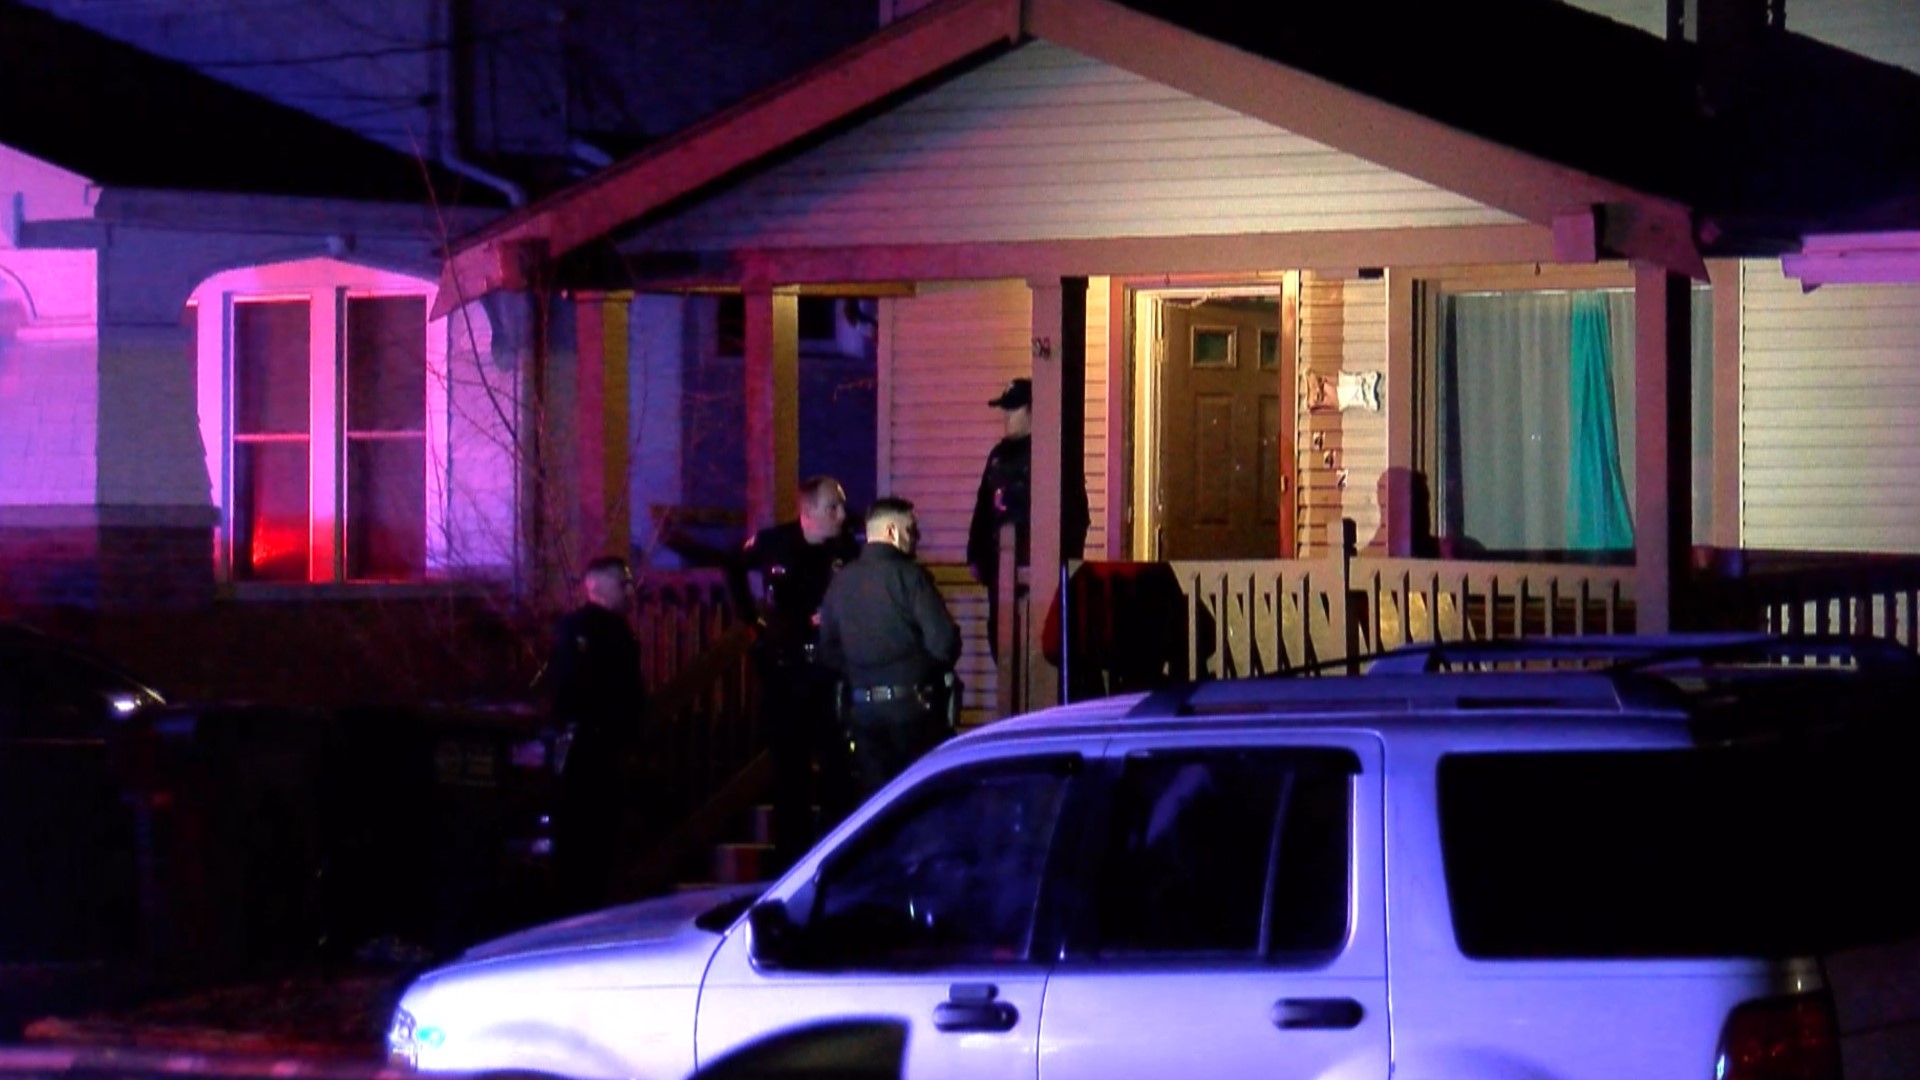 The shooting occurred around 3:30 a.m. on the 400 block of Danberry St.